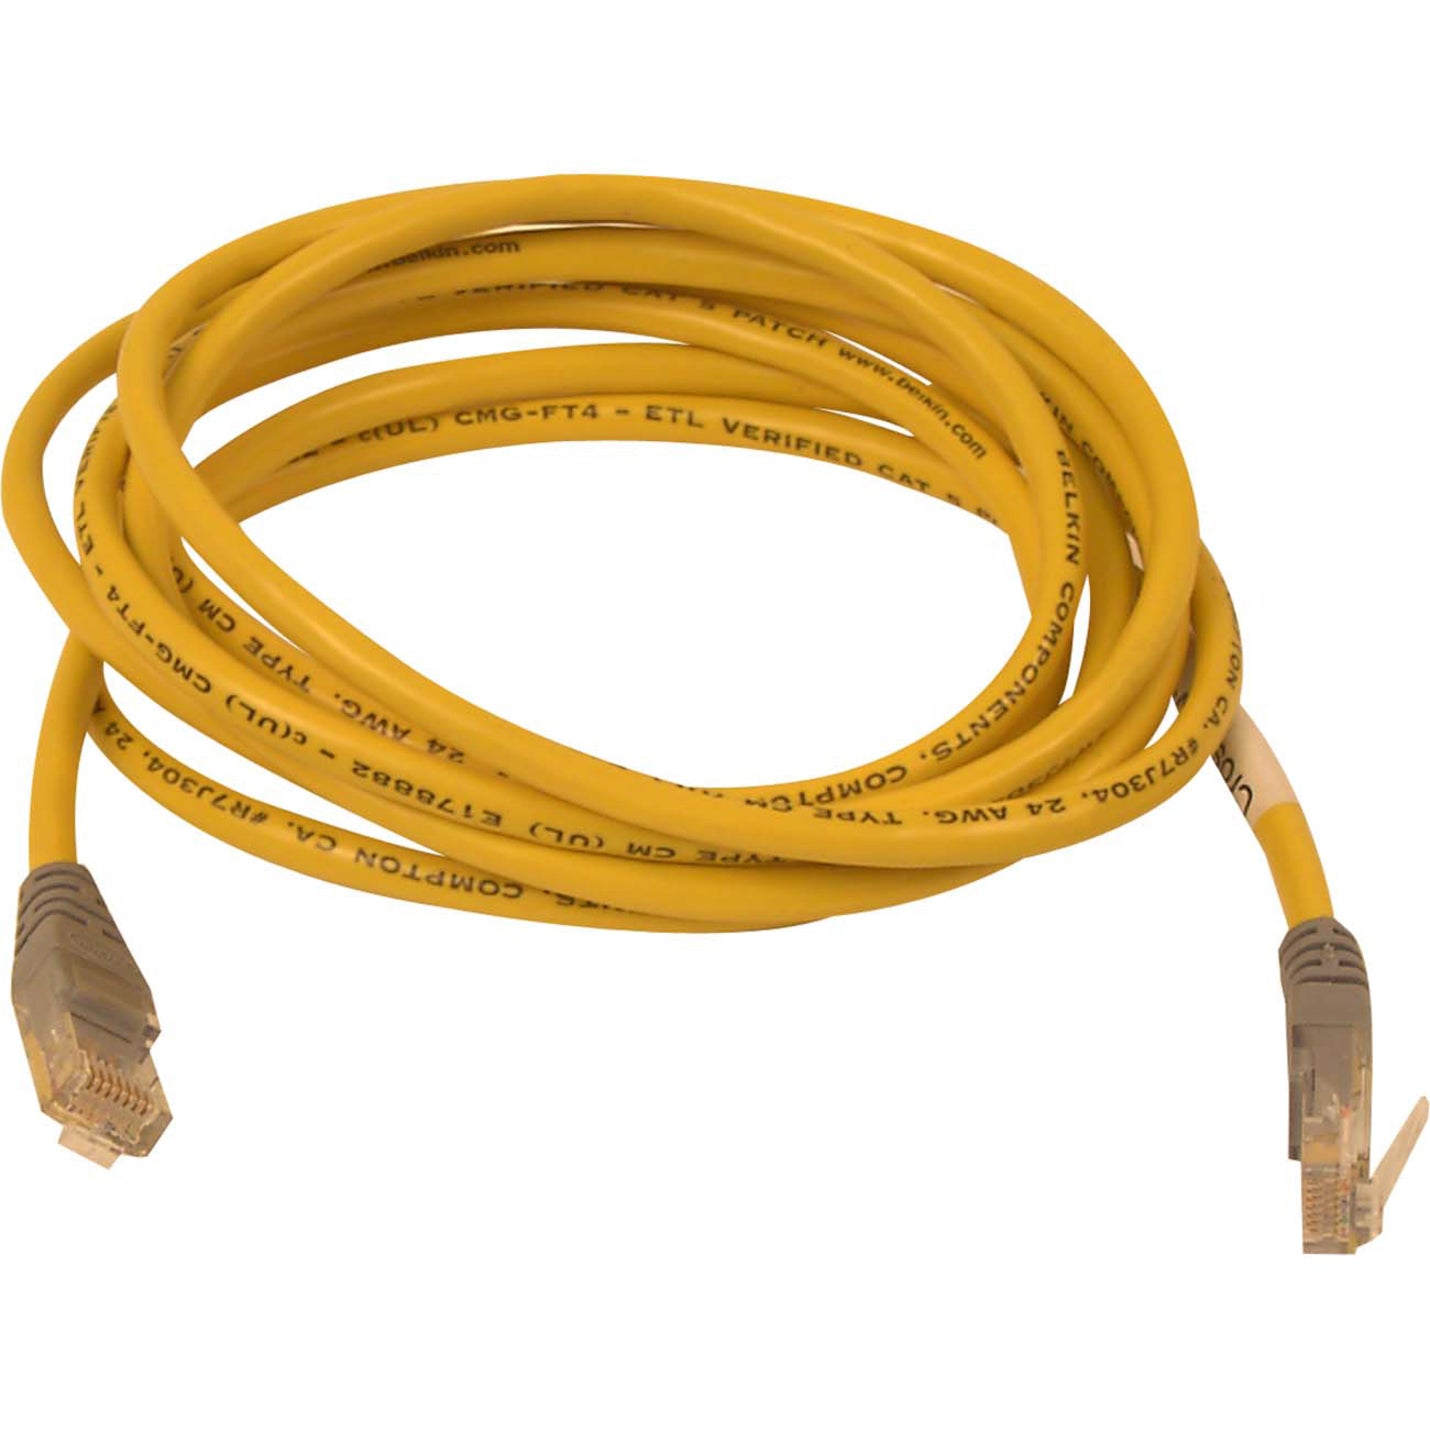 Belkin A3X126-03-YLW-M Category 5e Crossover Patch Cable, 3 ft, Copper Conductor, Yellow